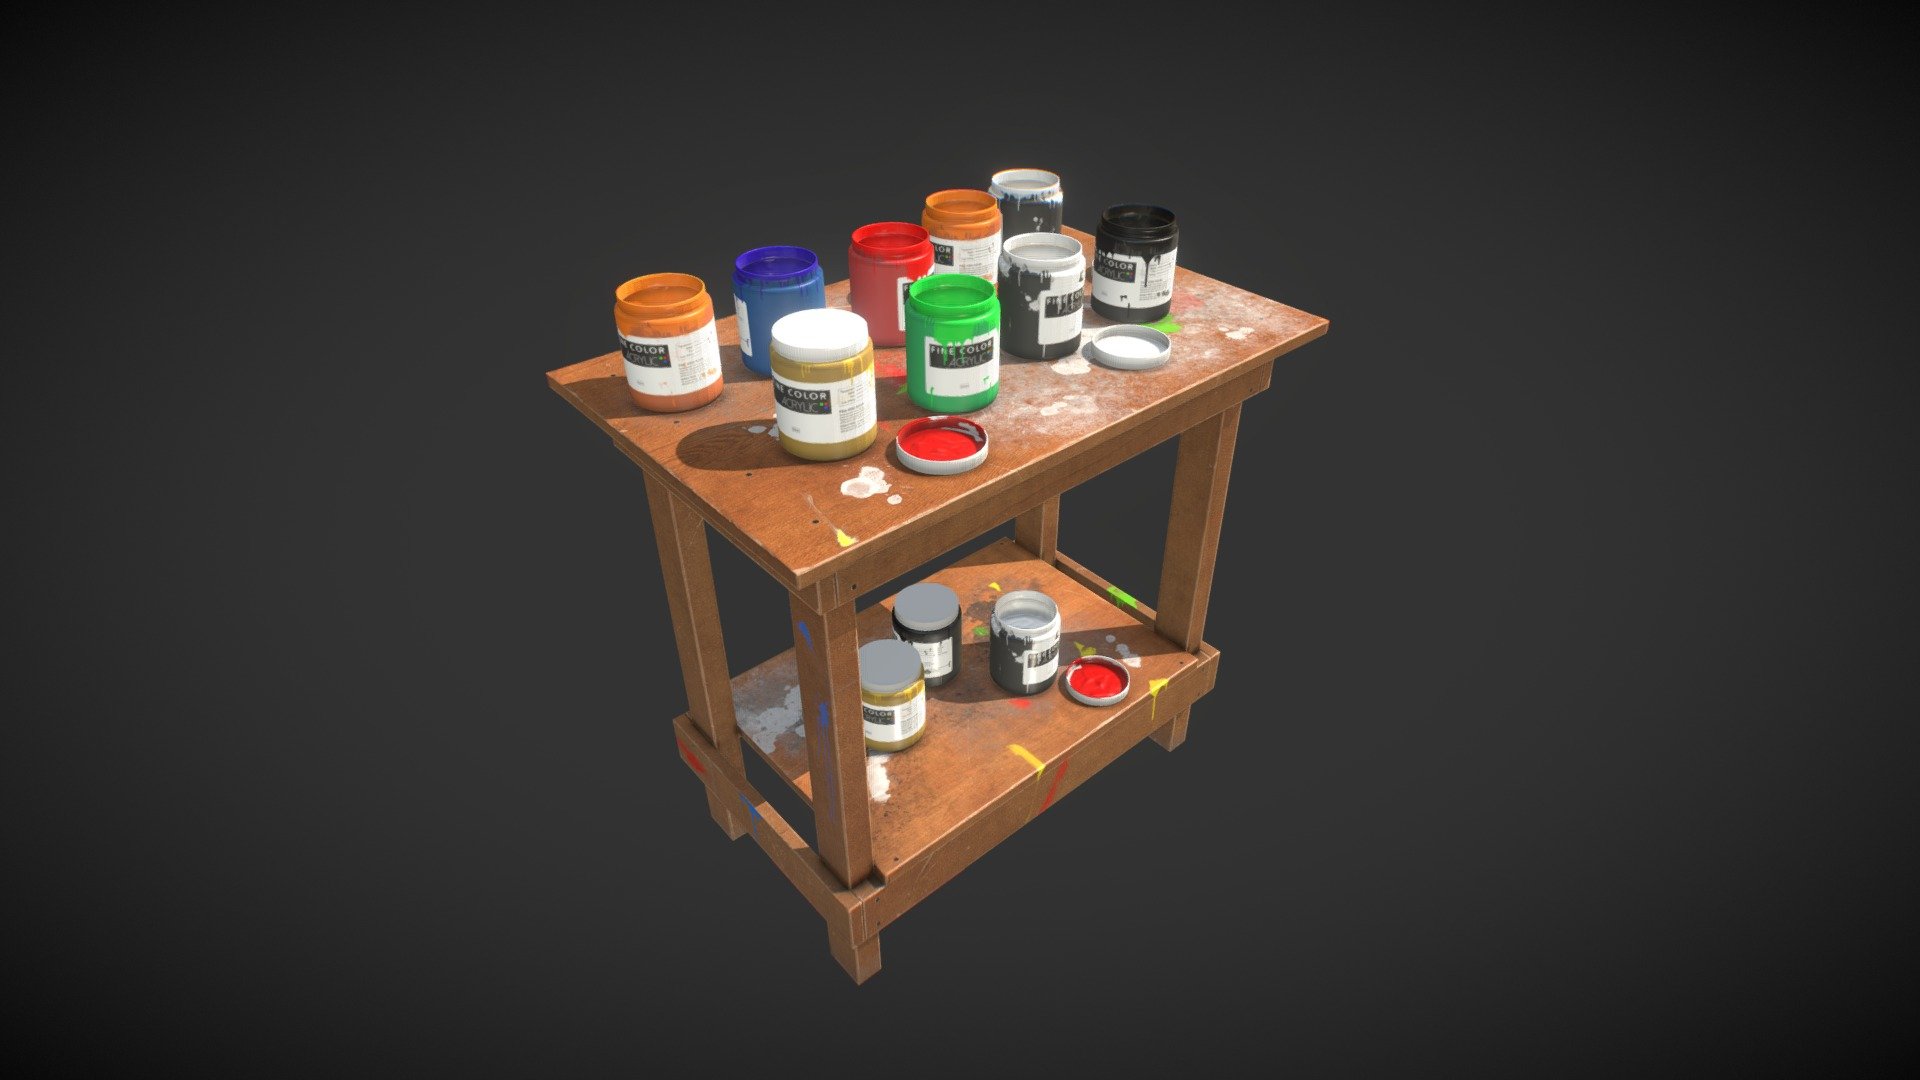 lowpoly game prop with PBR texture - Work Table with Acrylic - 3D model by J.Seok Lee (@sonaki82) 3d model